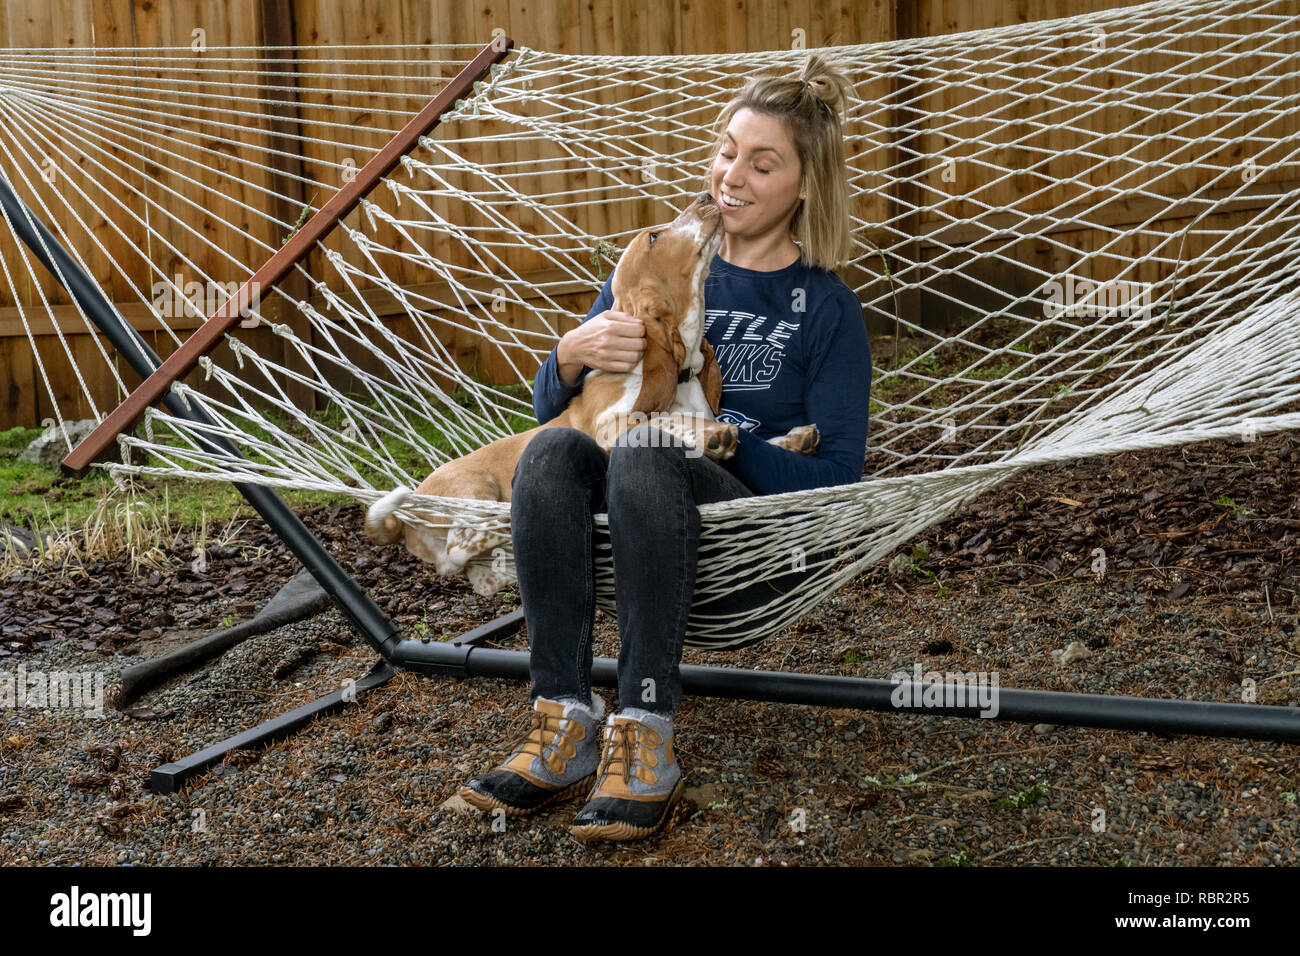 Renton, Washington, USA.  Woman being affectionate with her five month old Basset Hound puppy 'Elvis' as they rest in a  hammock. Stock Photo